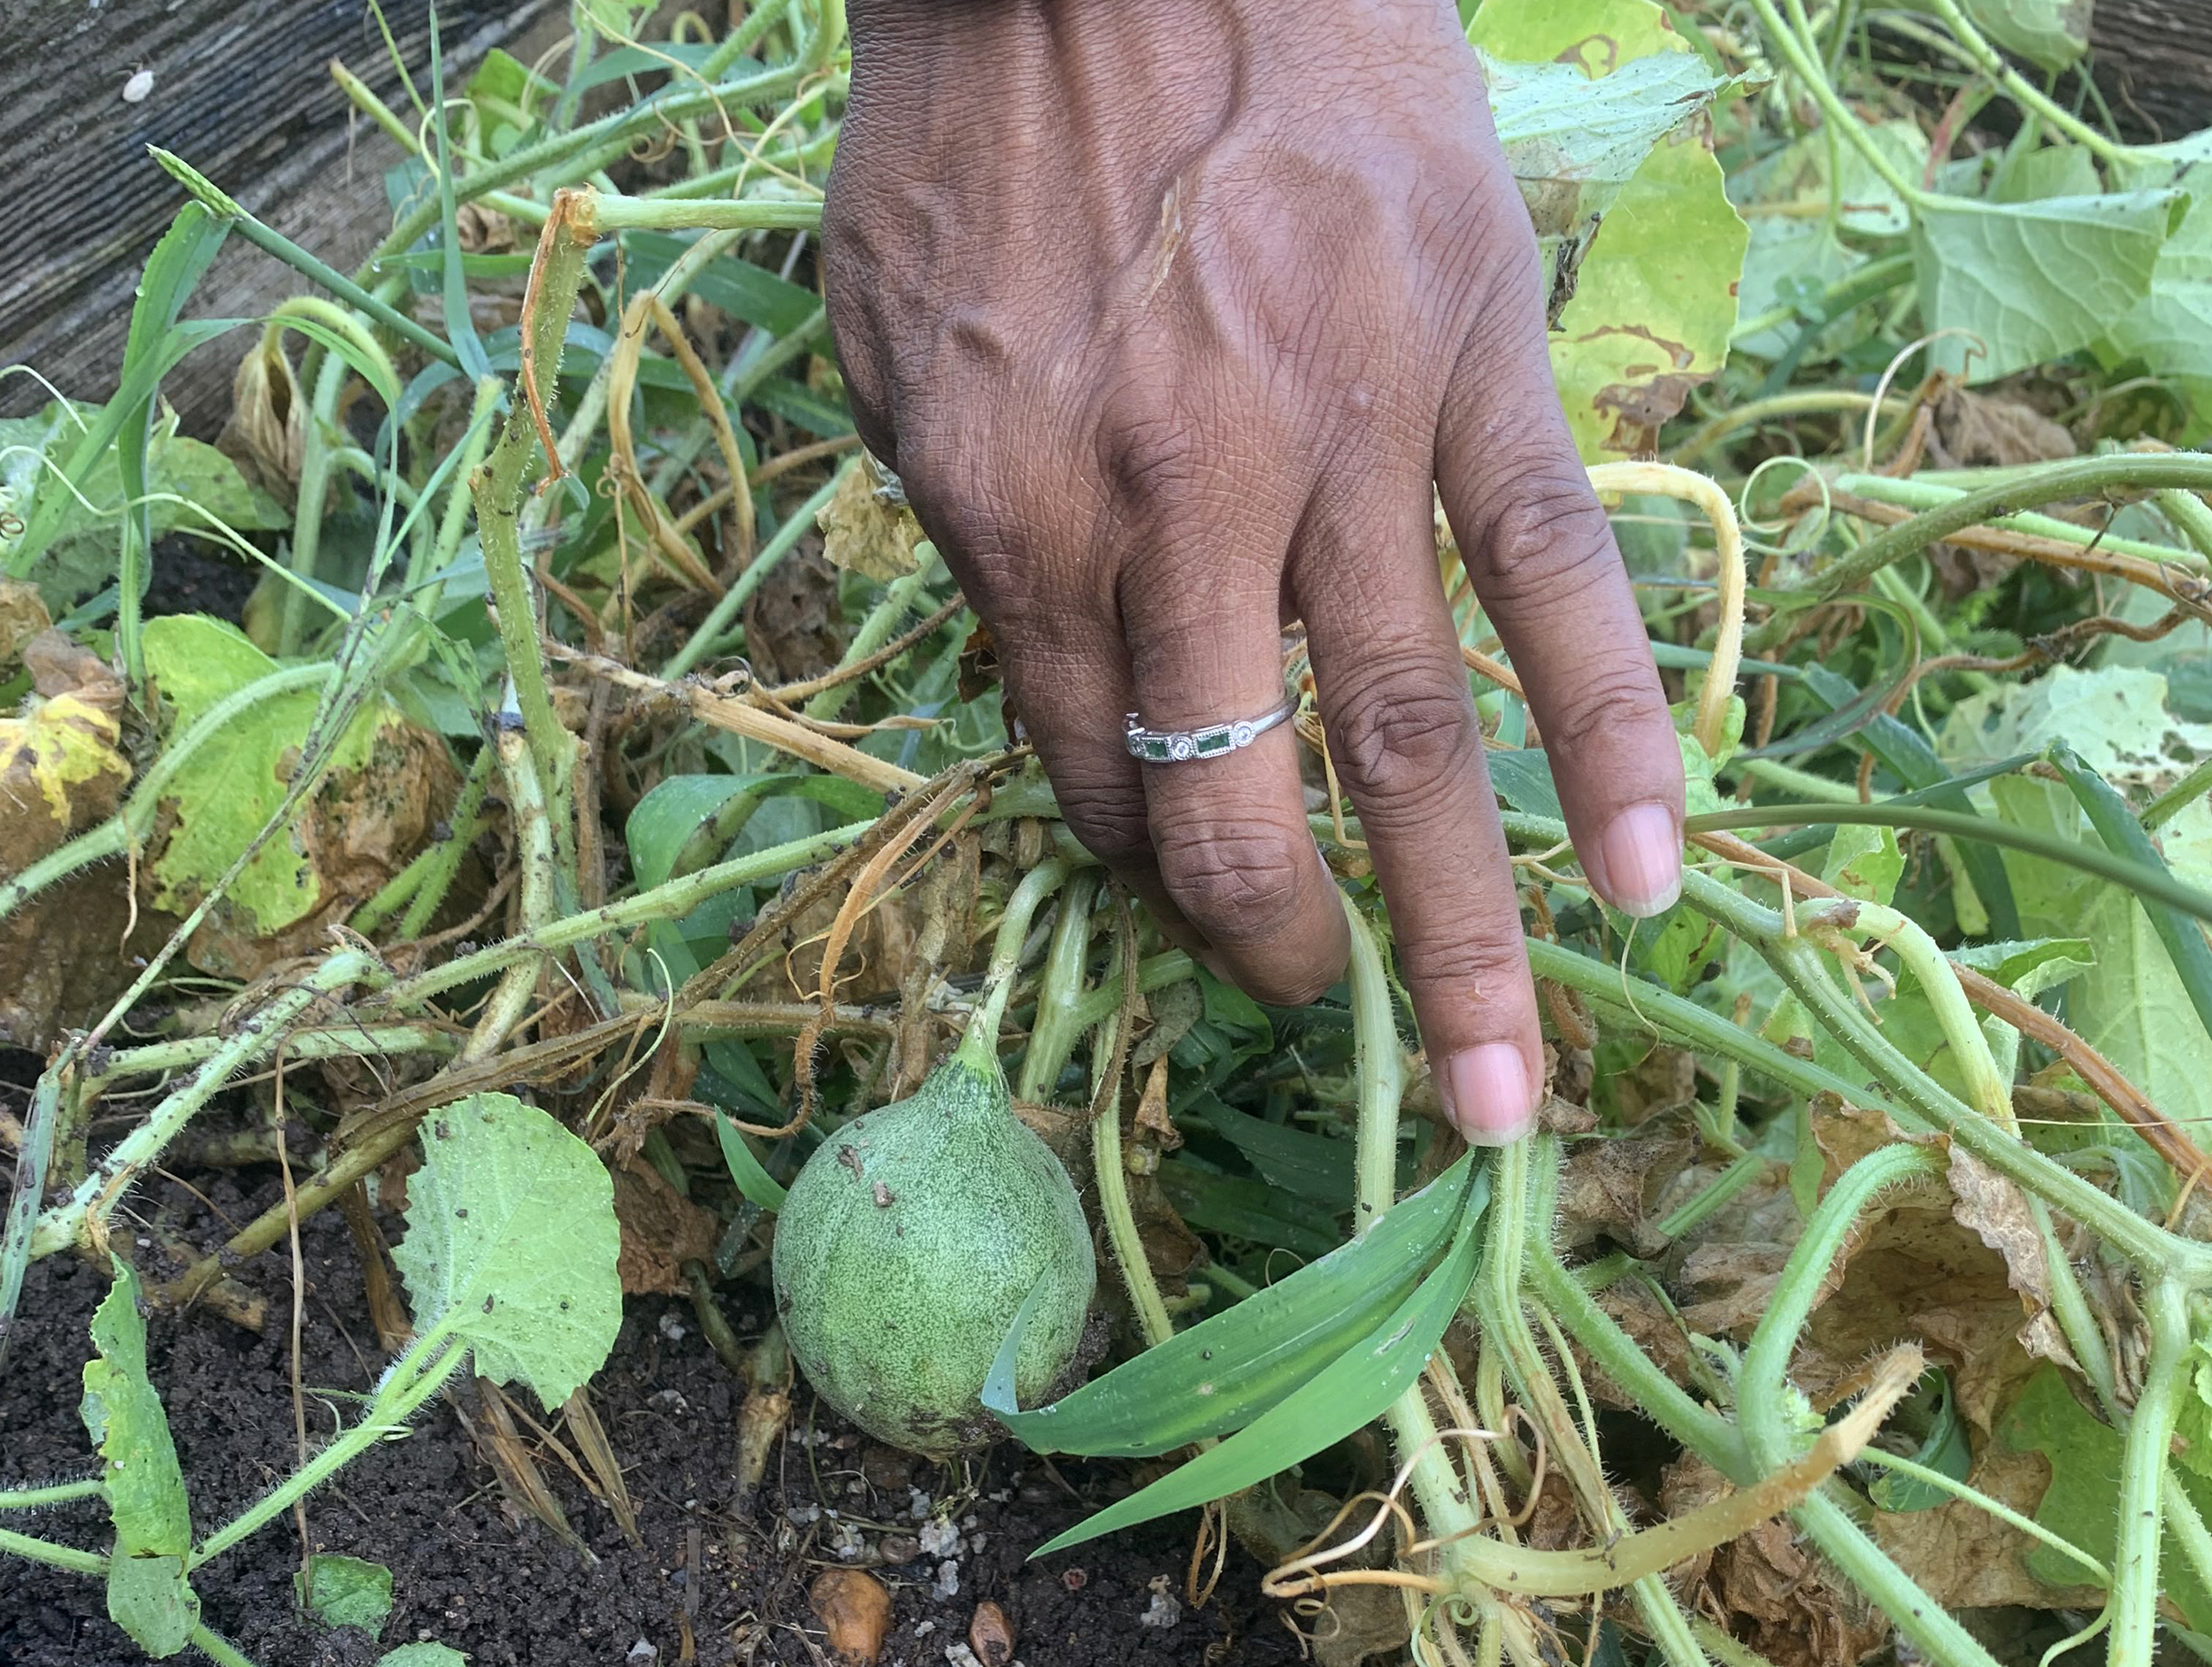 Woman’s hand pushes weeds back to reveal a small green cantaloupe sprouting.